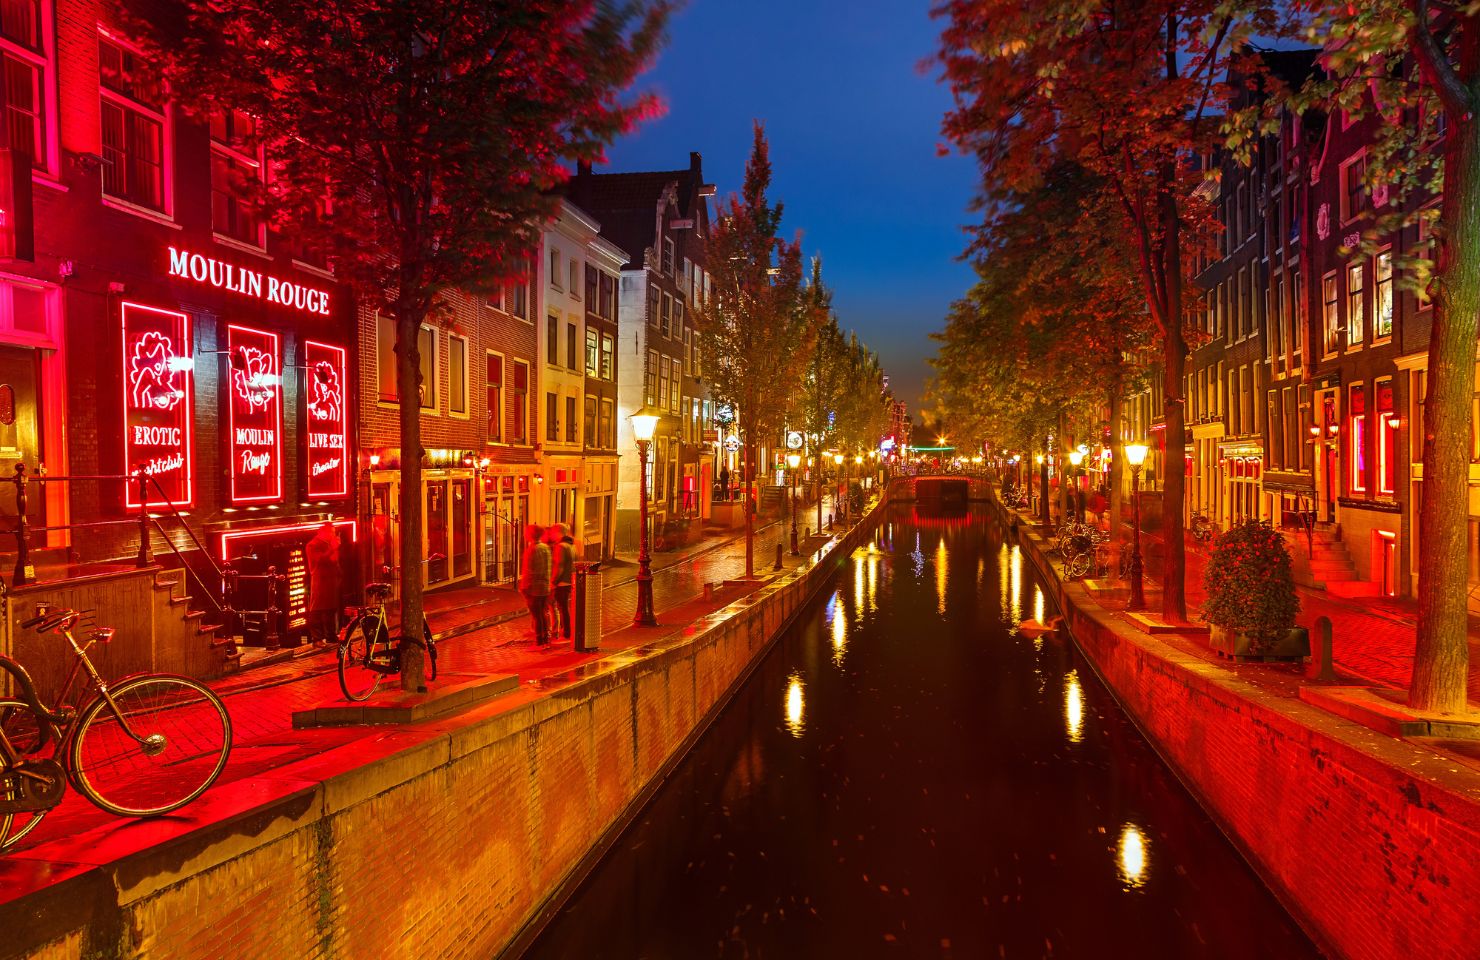 Views over the Canals in the Red Light District of Amsterdam